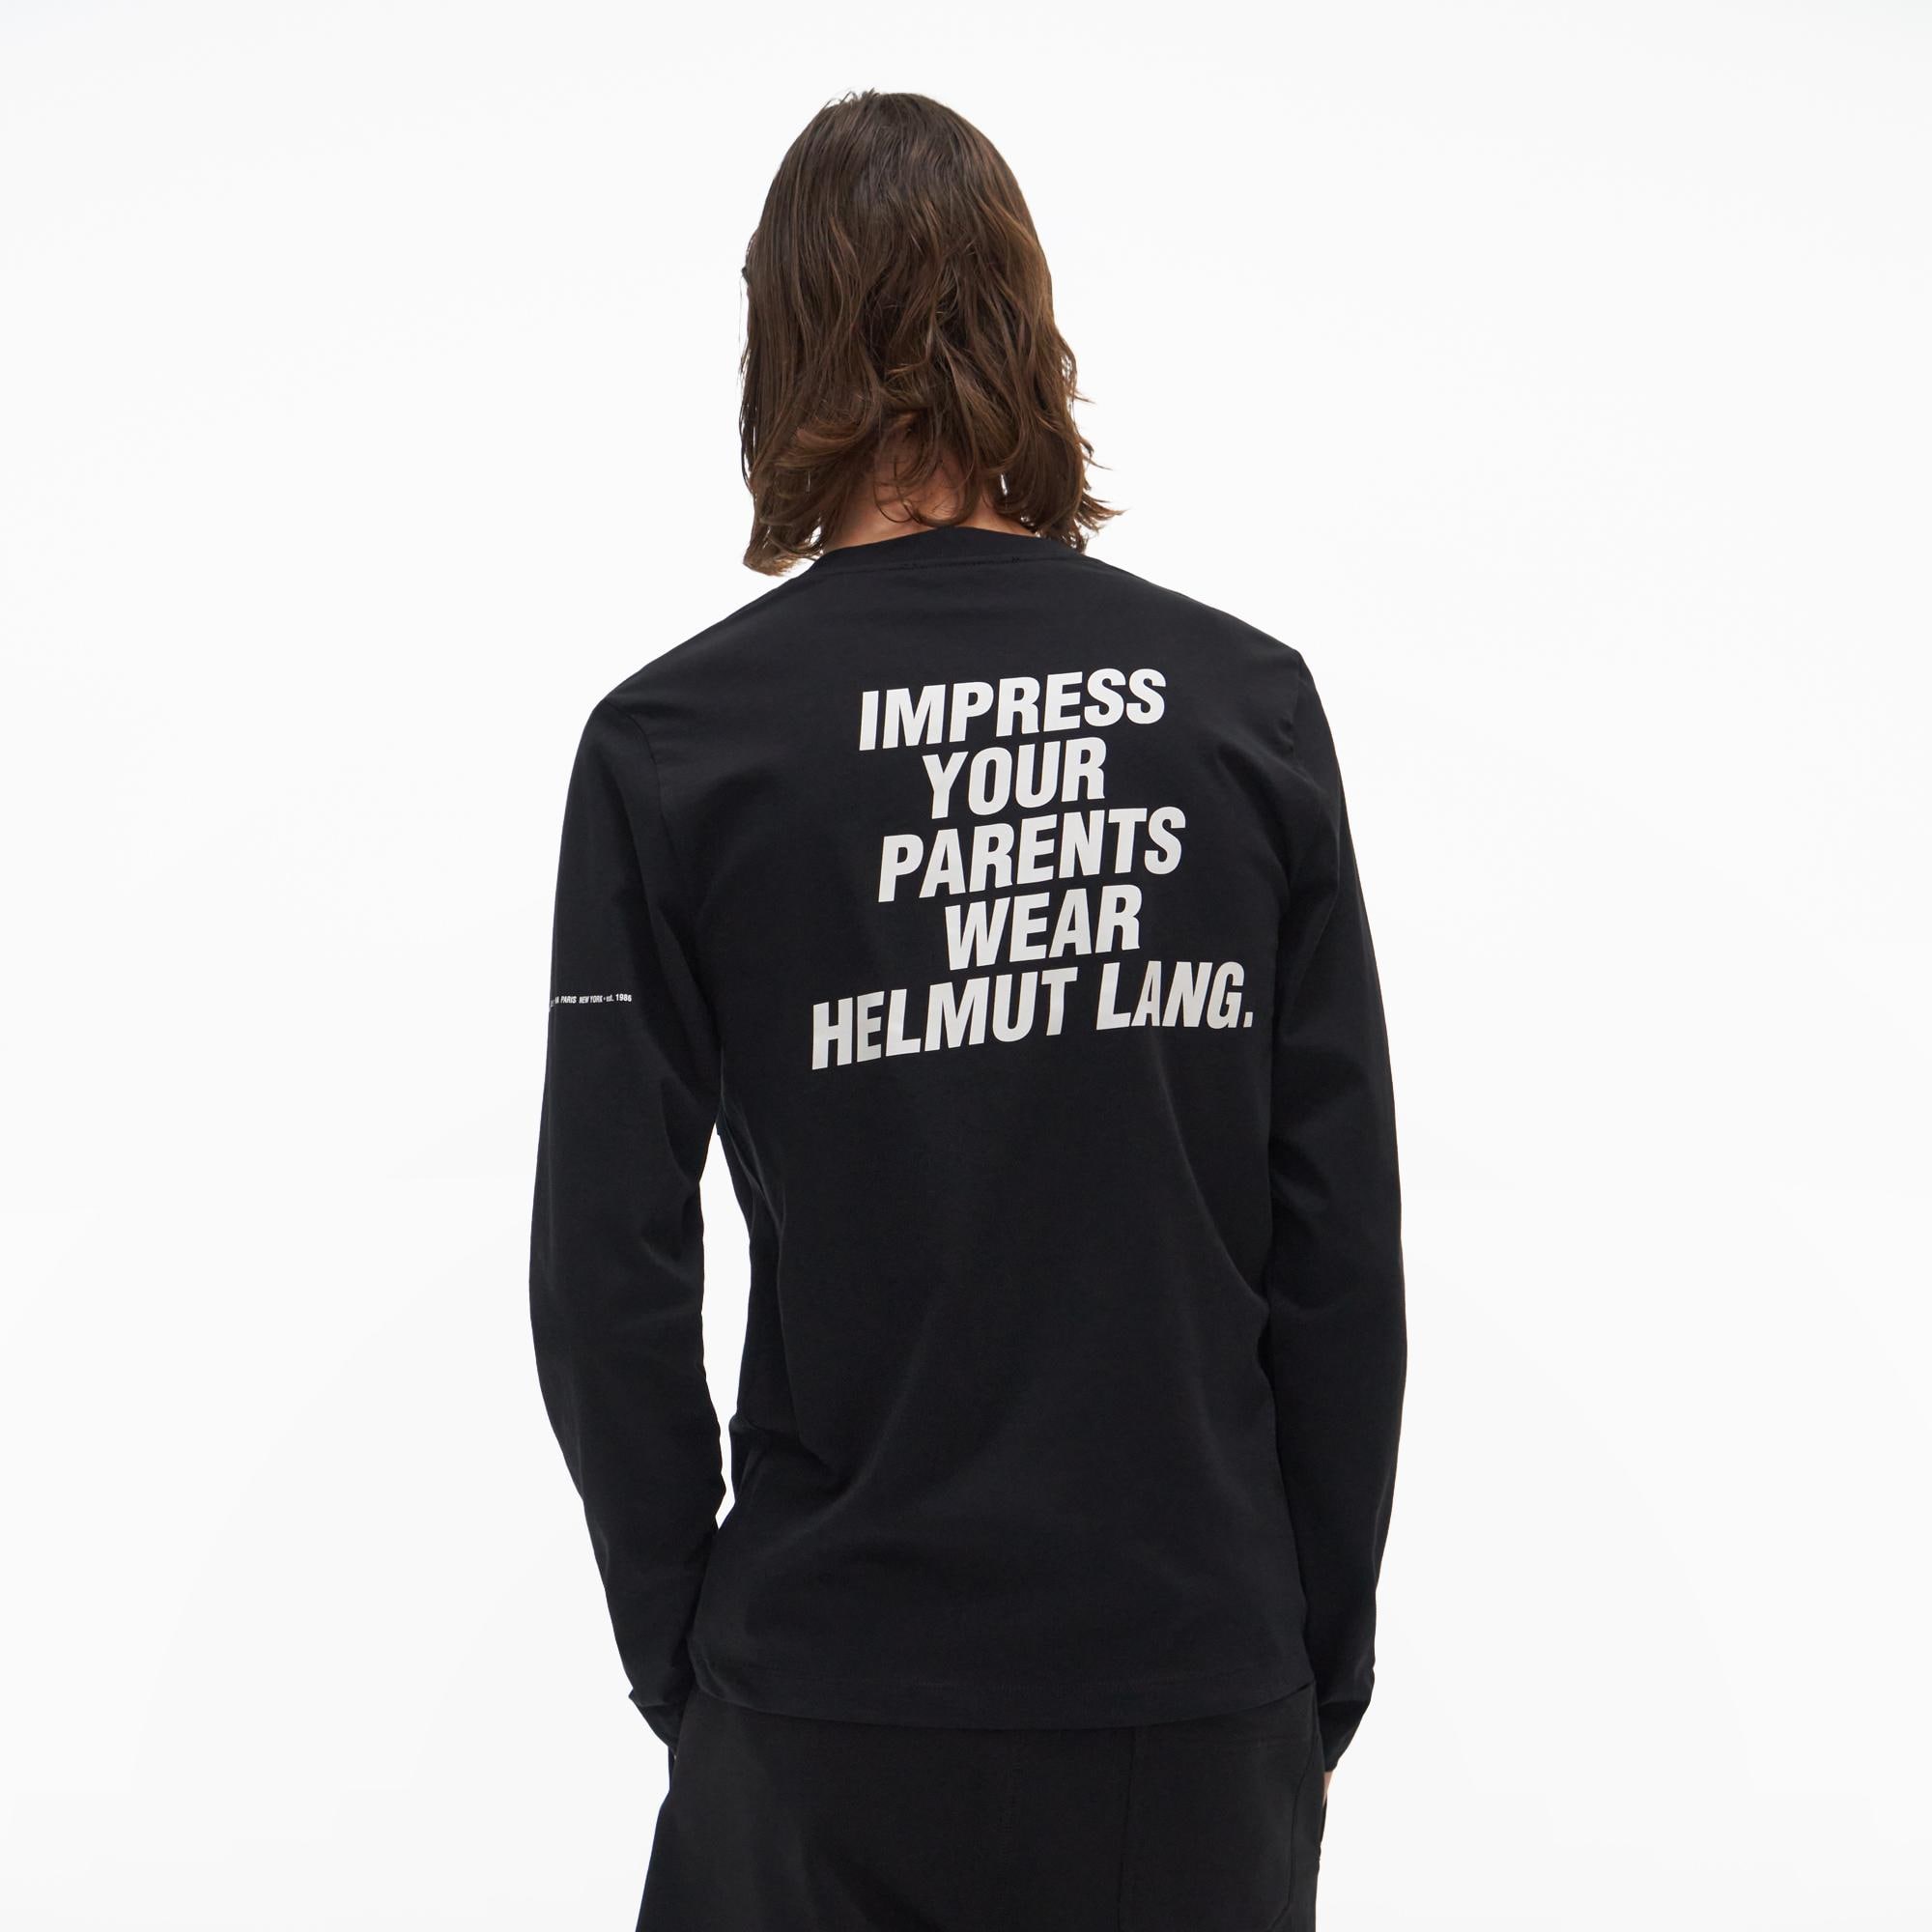 Modest and Lasting – Helmut Lang